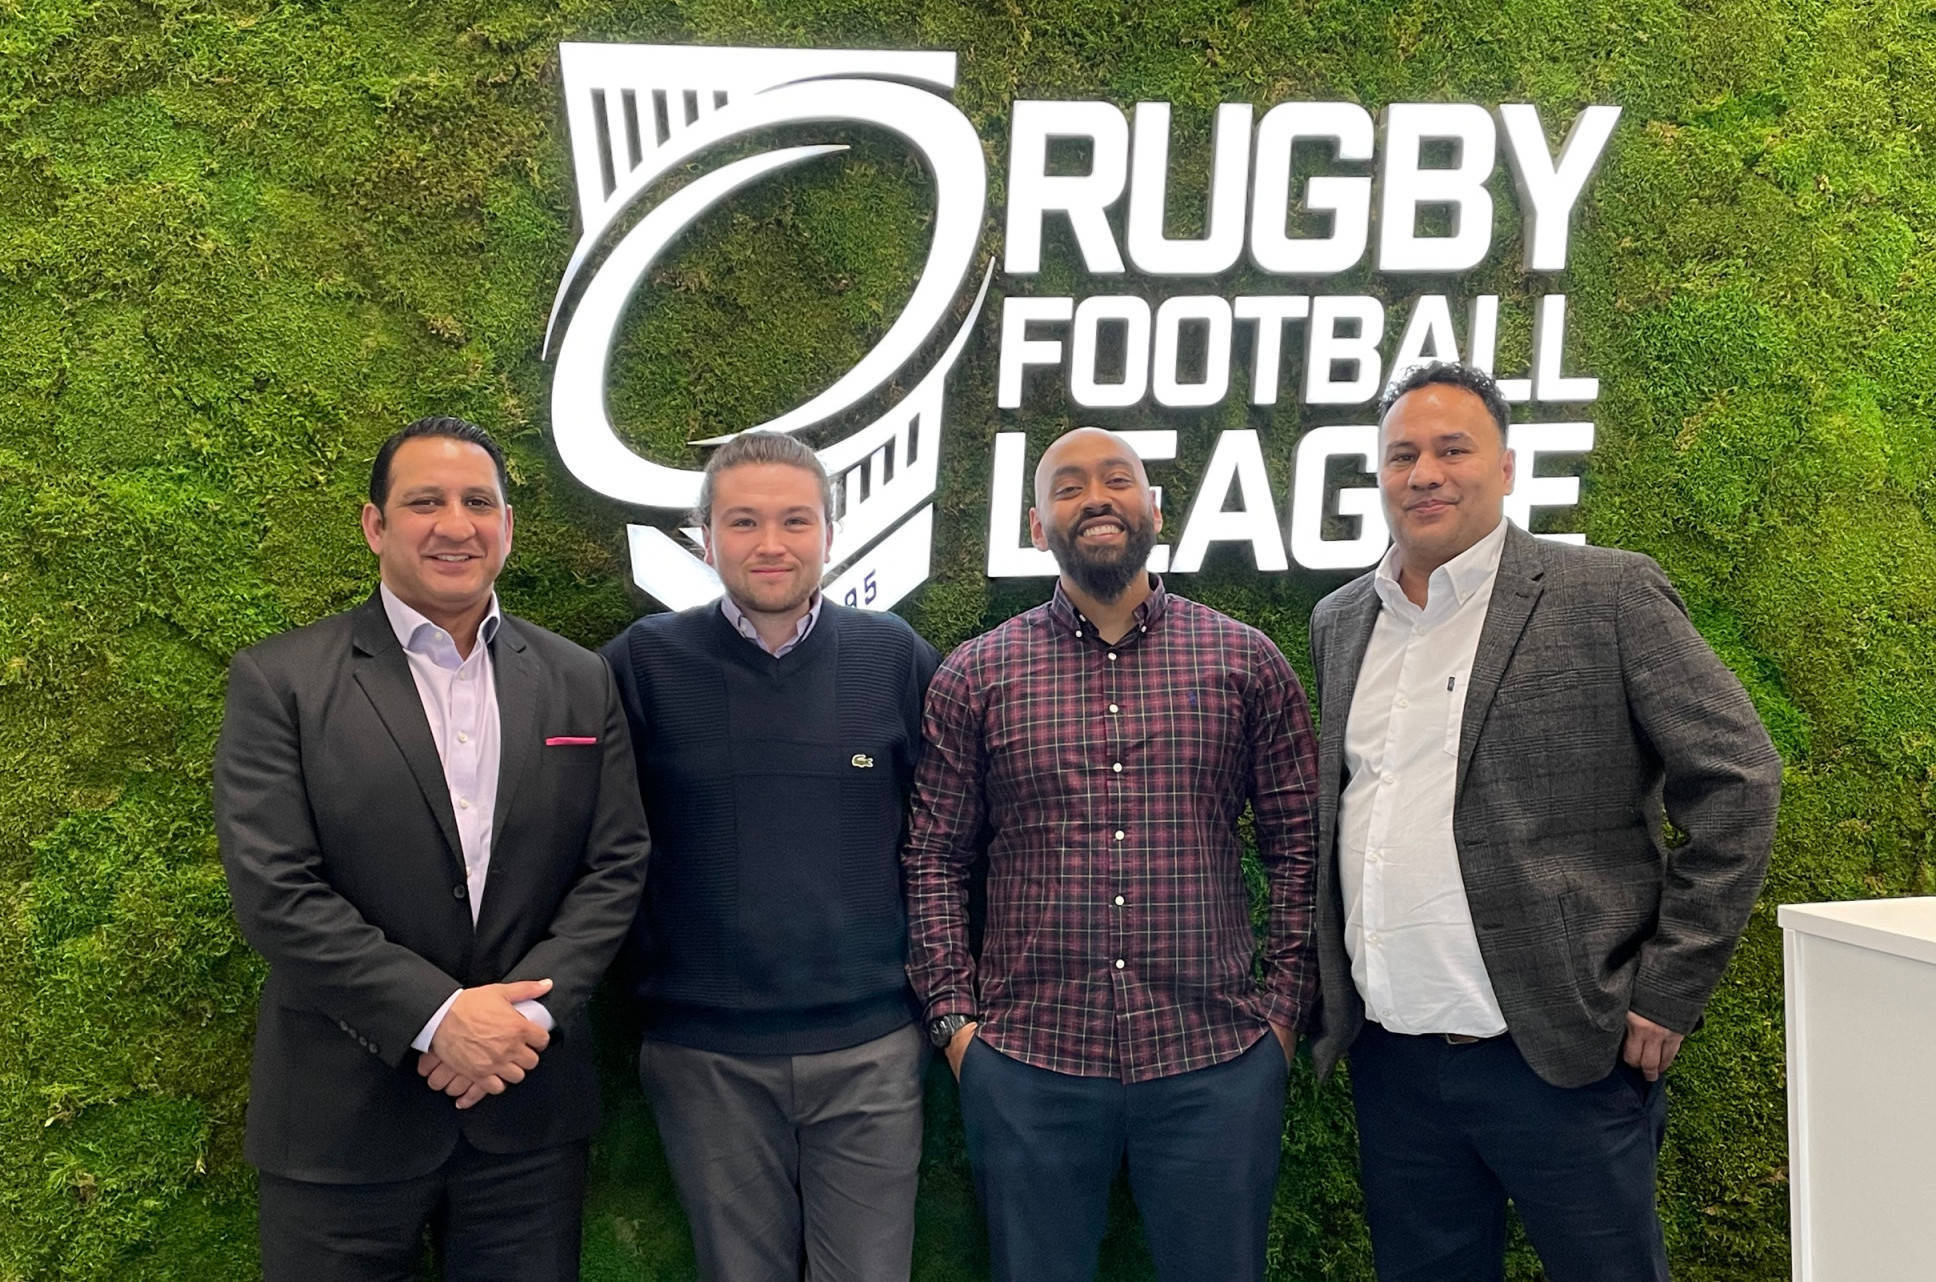 Rugby Football League supports Muslim communities and players ahead of Ramadan